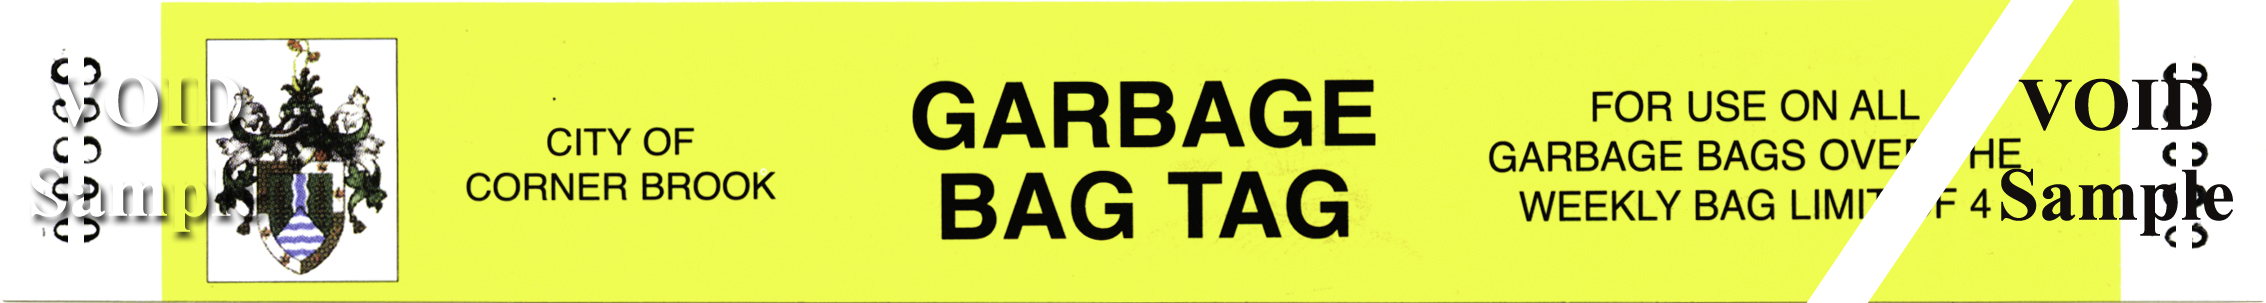 Garbage Bag Tag from Corner Brook, NL, to be used on each bag over the limit of four